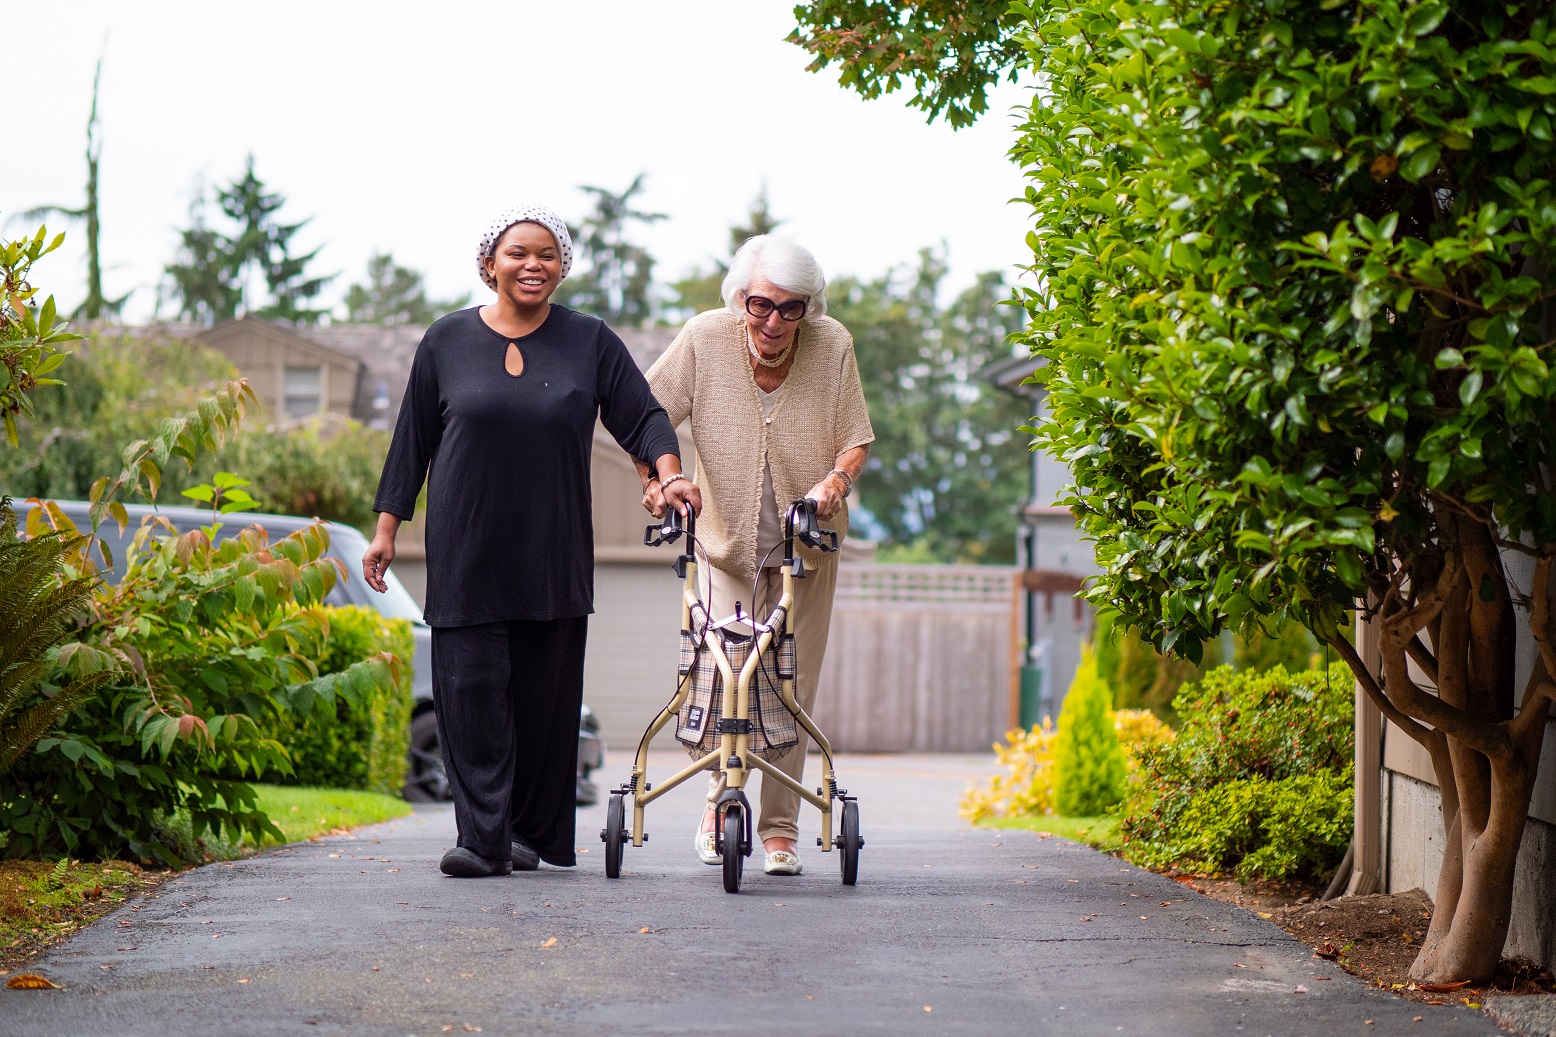 Family Resource Home Care - Everett/Snohomish County image